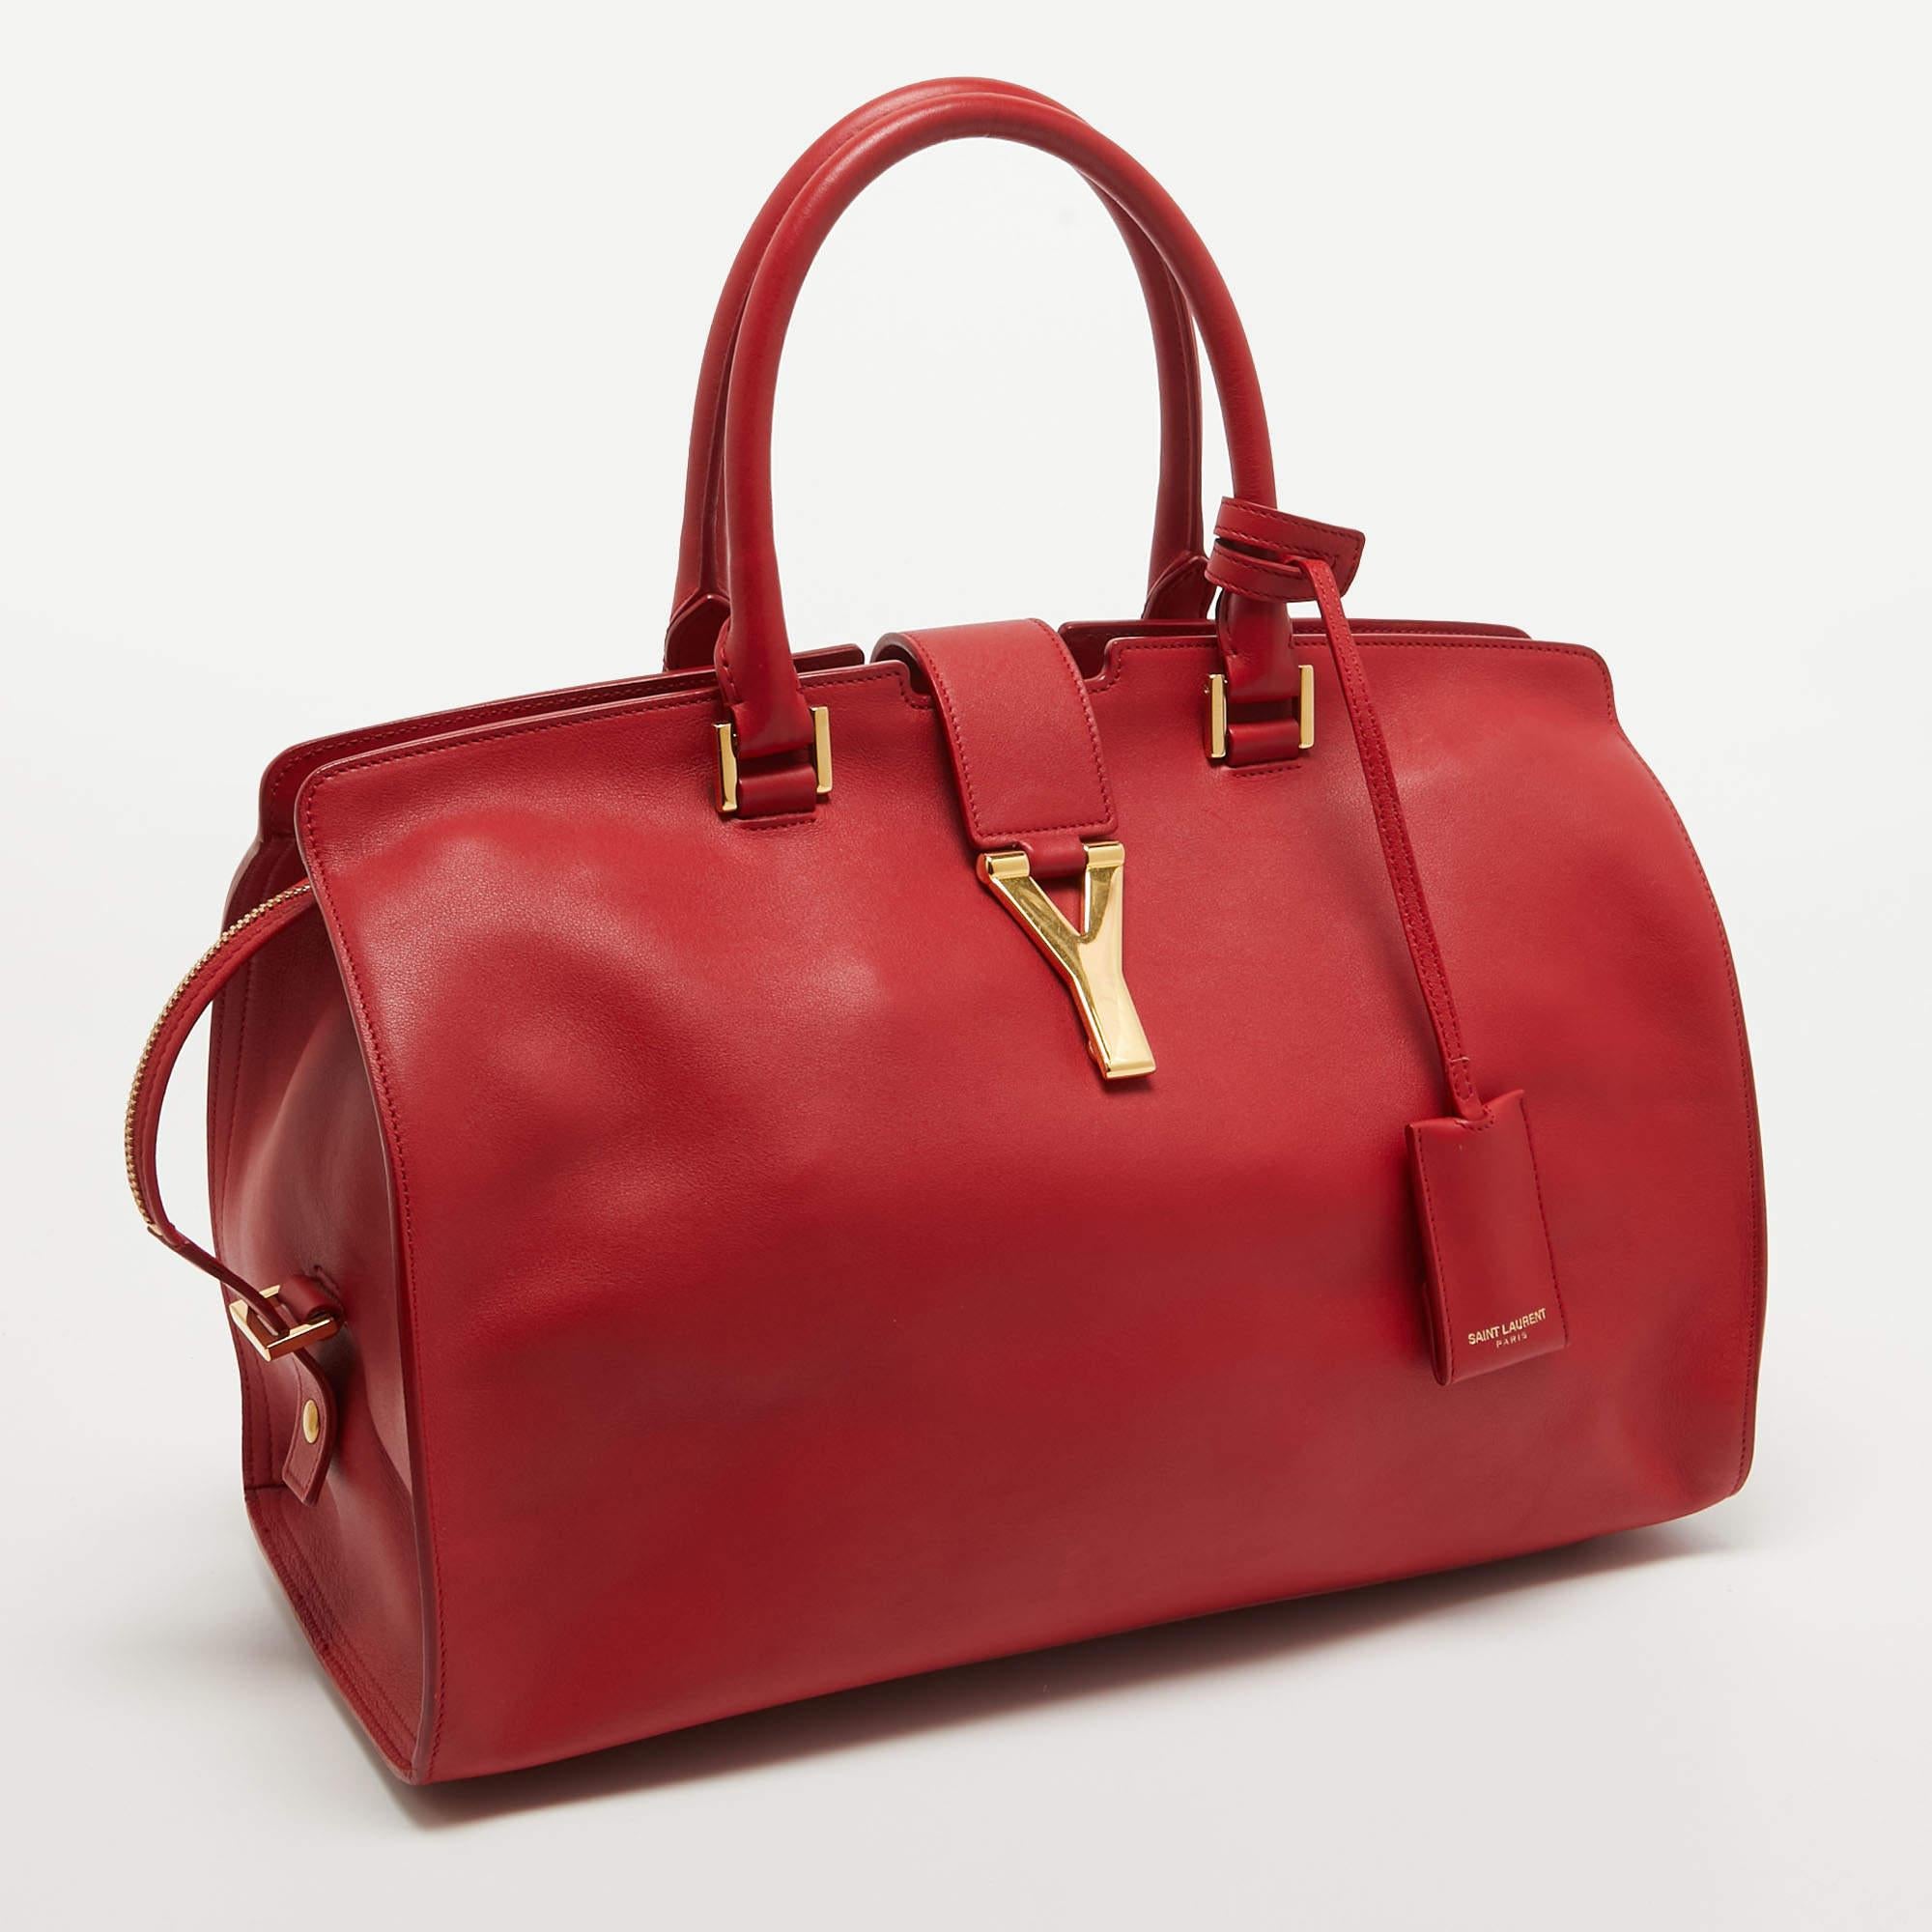 Saint Laurent Red Leather Medium Cabas Chyc Tote 11